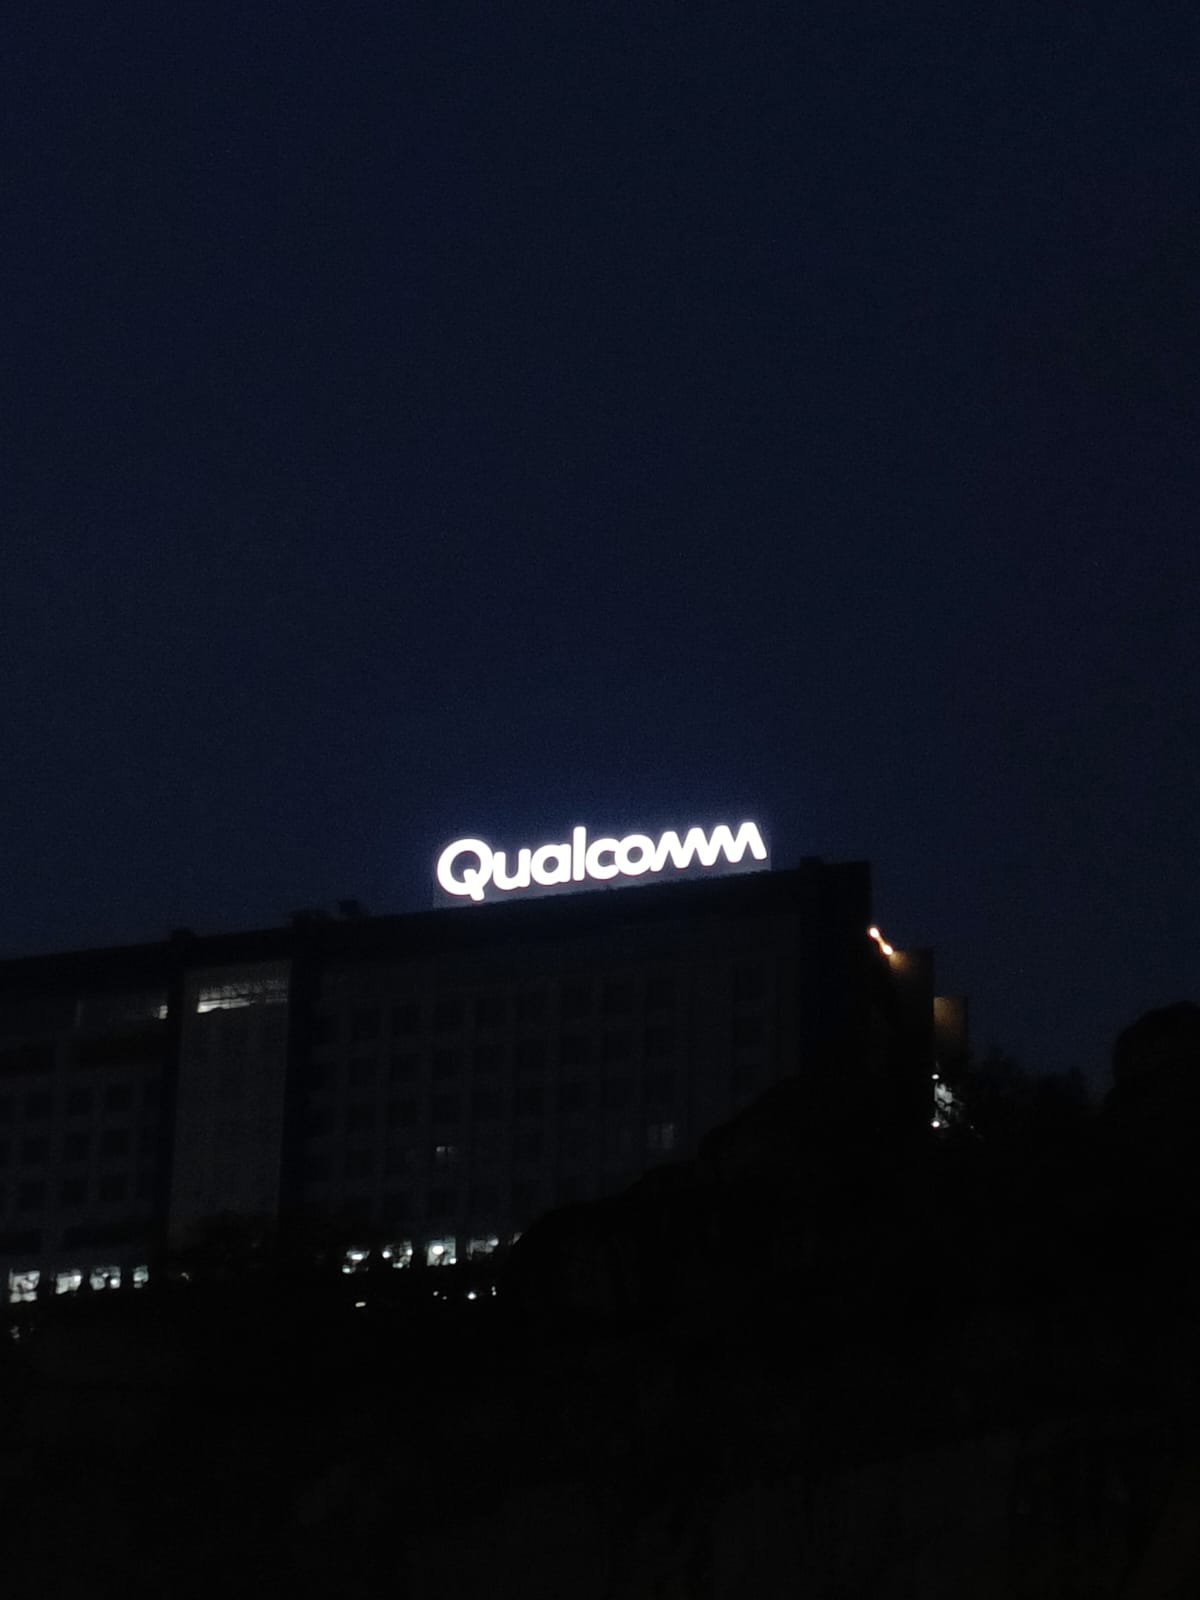 LED Signage on the Building facade